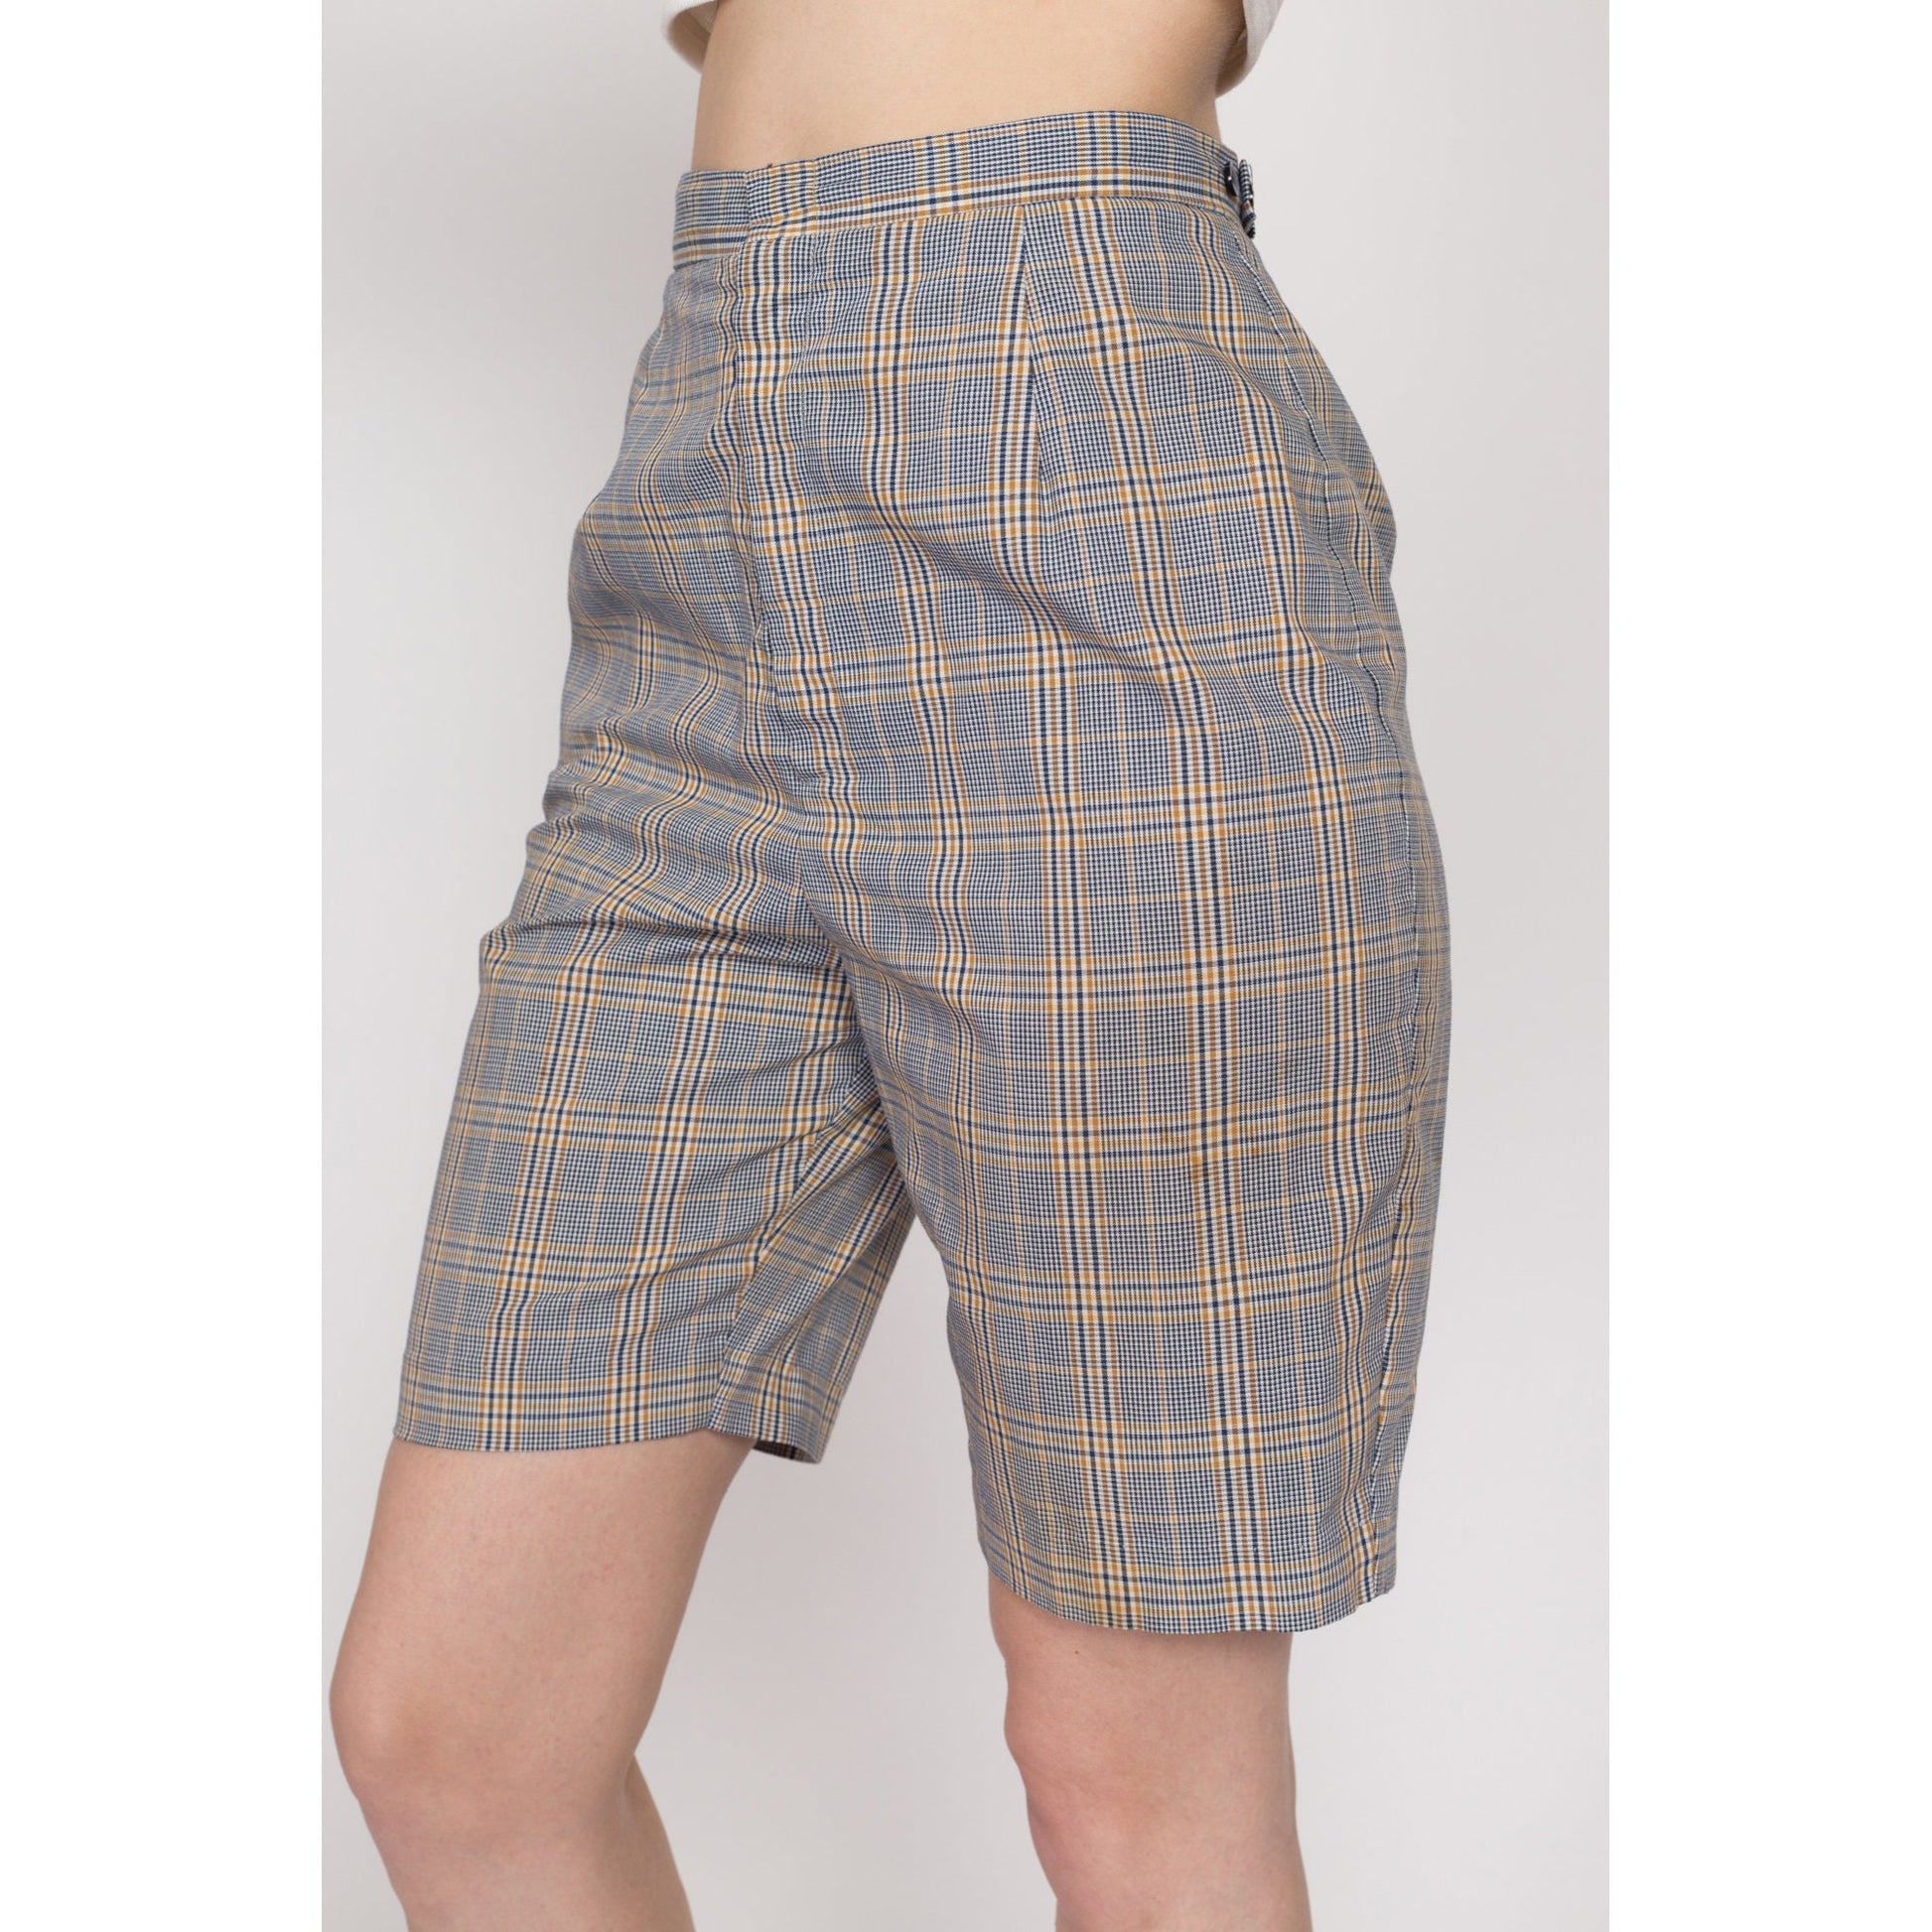 XS 60s Blue & Yellow Plaid High Waisted Shorts 23"-25" | Retro Vintage Curvy Hourglass Fit Bermuda Shorts